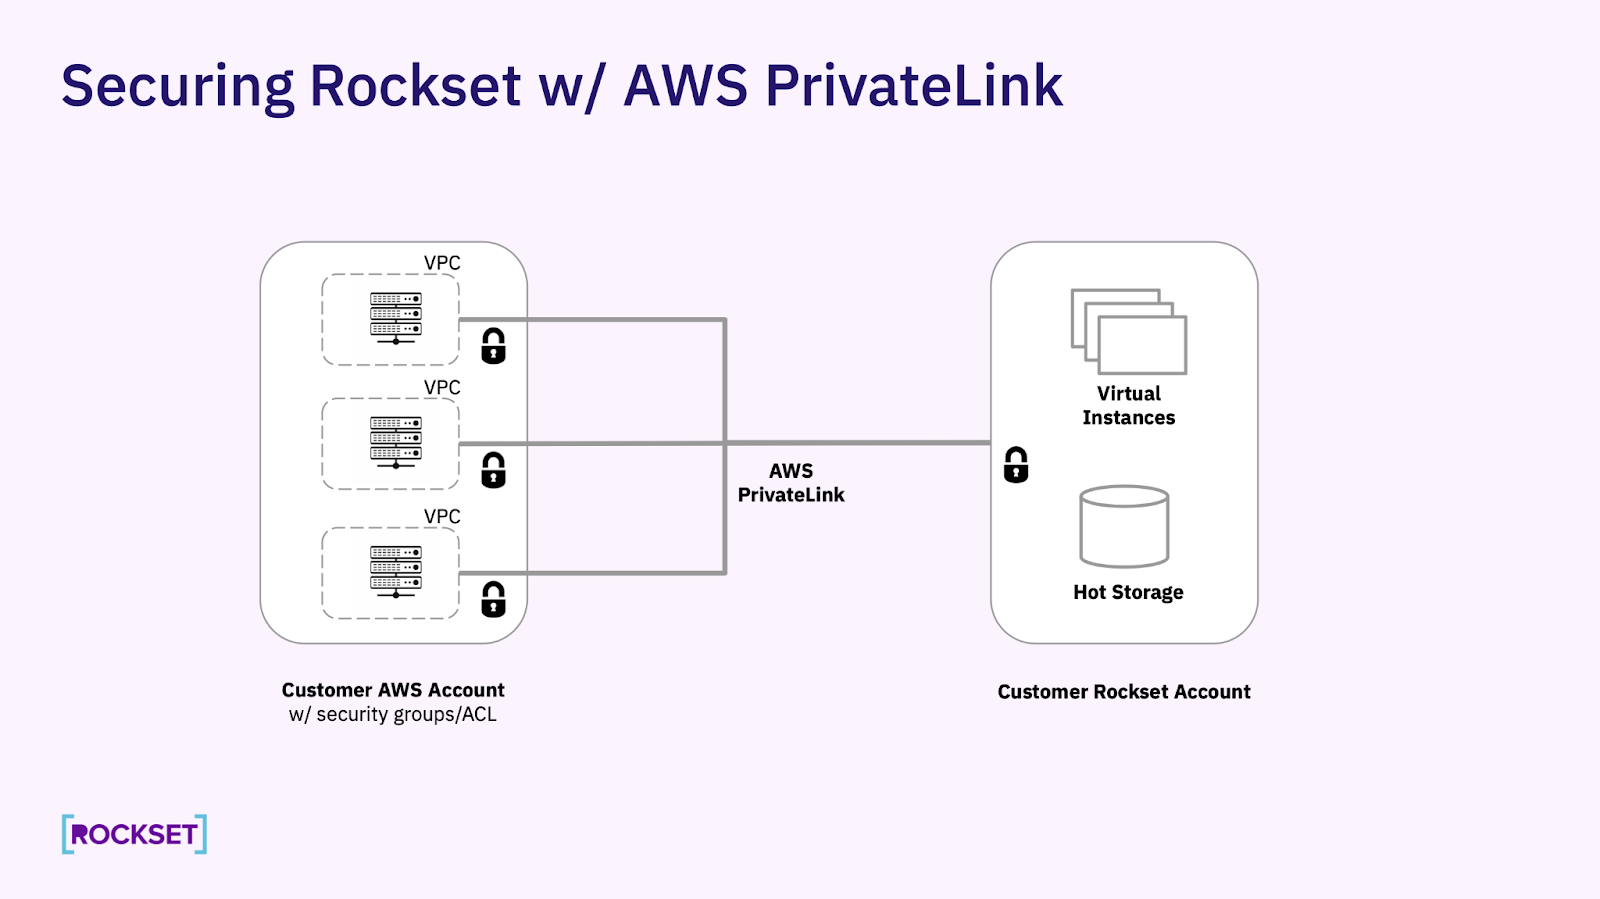 AWS PrivateLink architecture with the customer's AWS VPC/account and their Rockset account